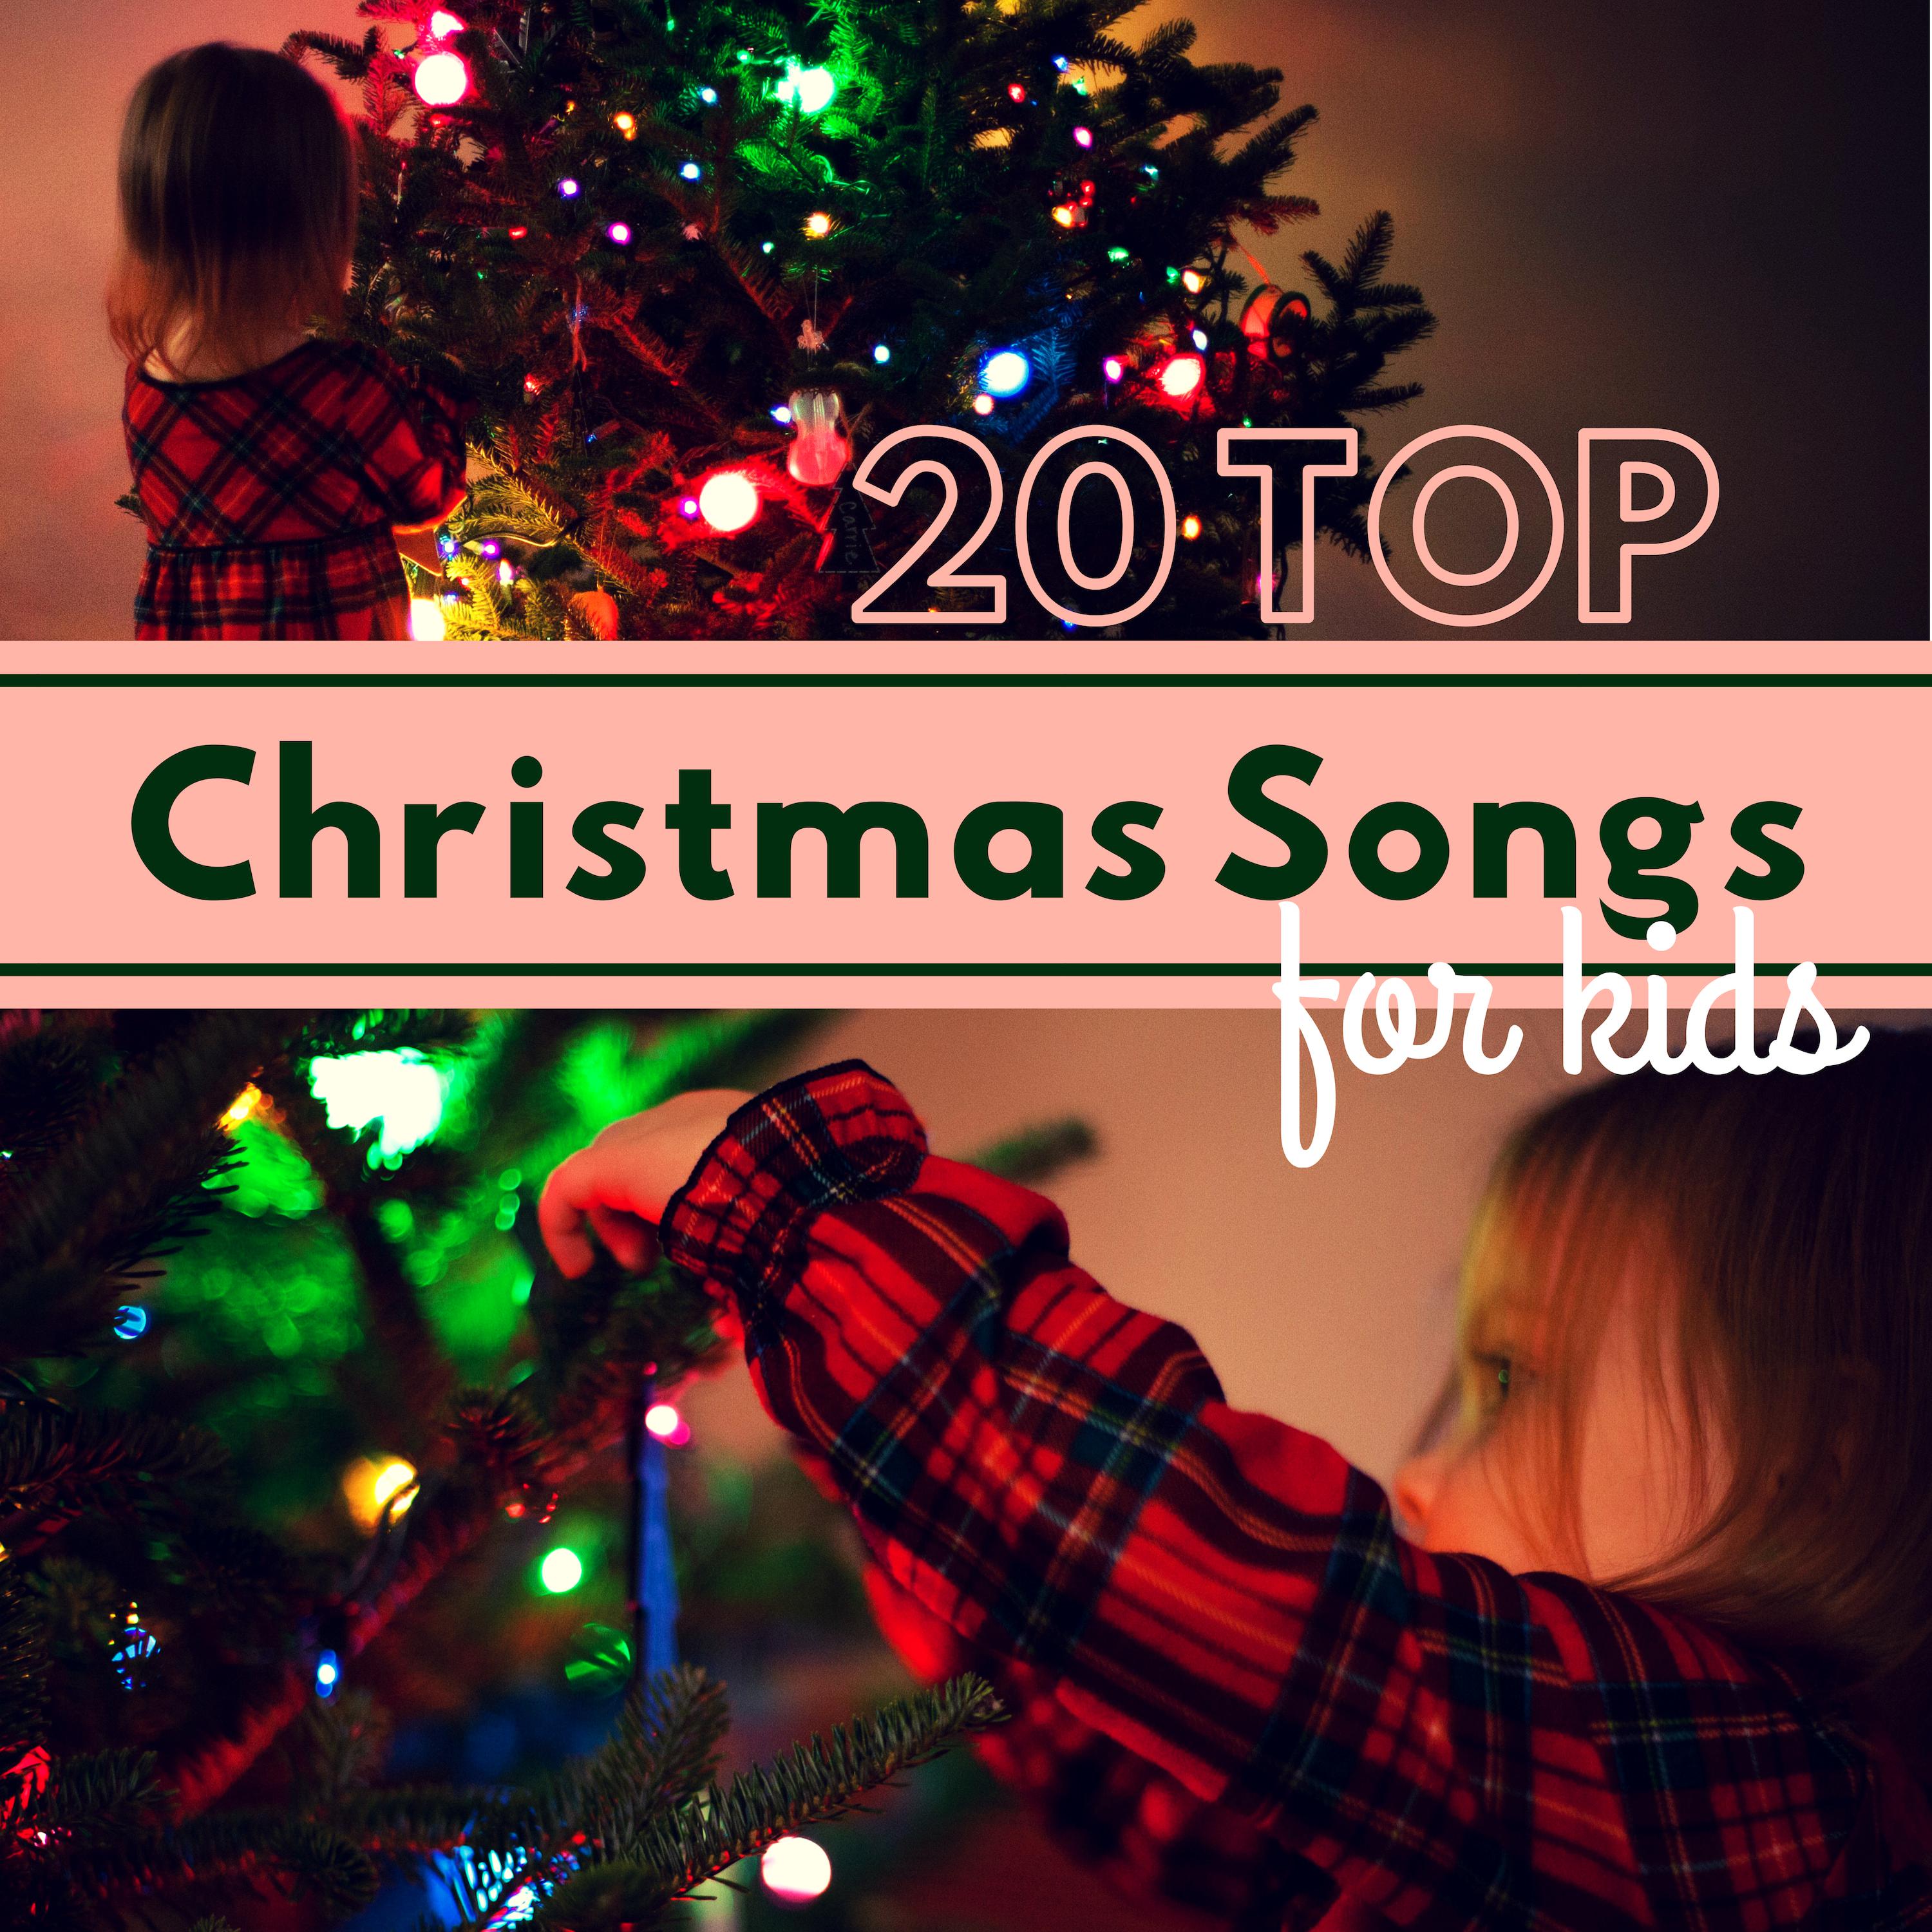 20 TOP Christmas Songs for Kids - Timeless Classics for Children & Babies Waiting for Santa